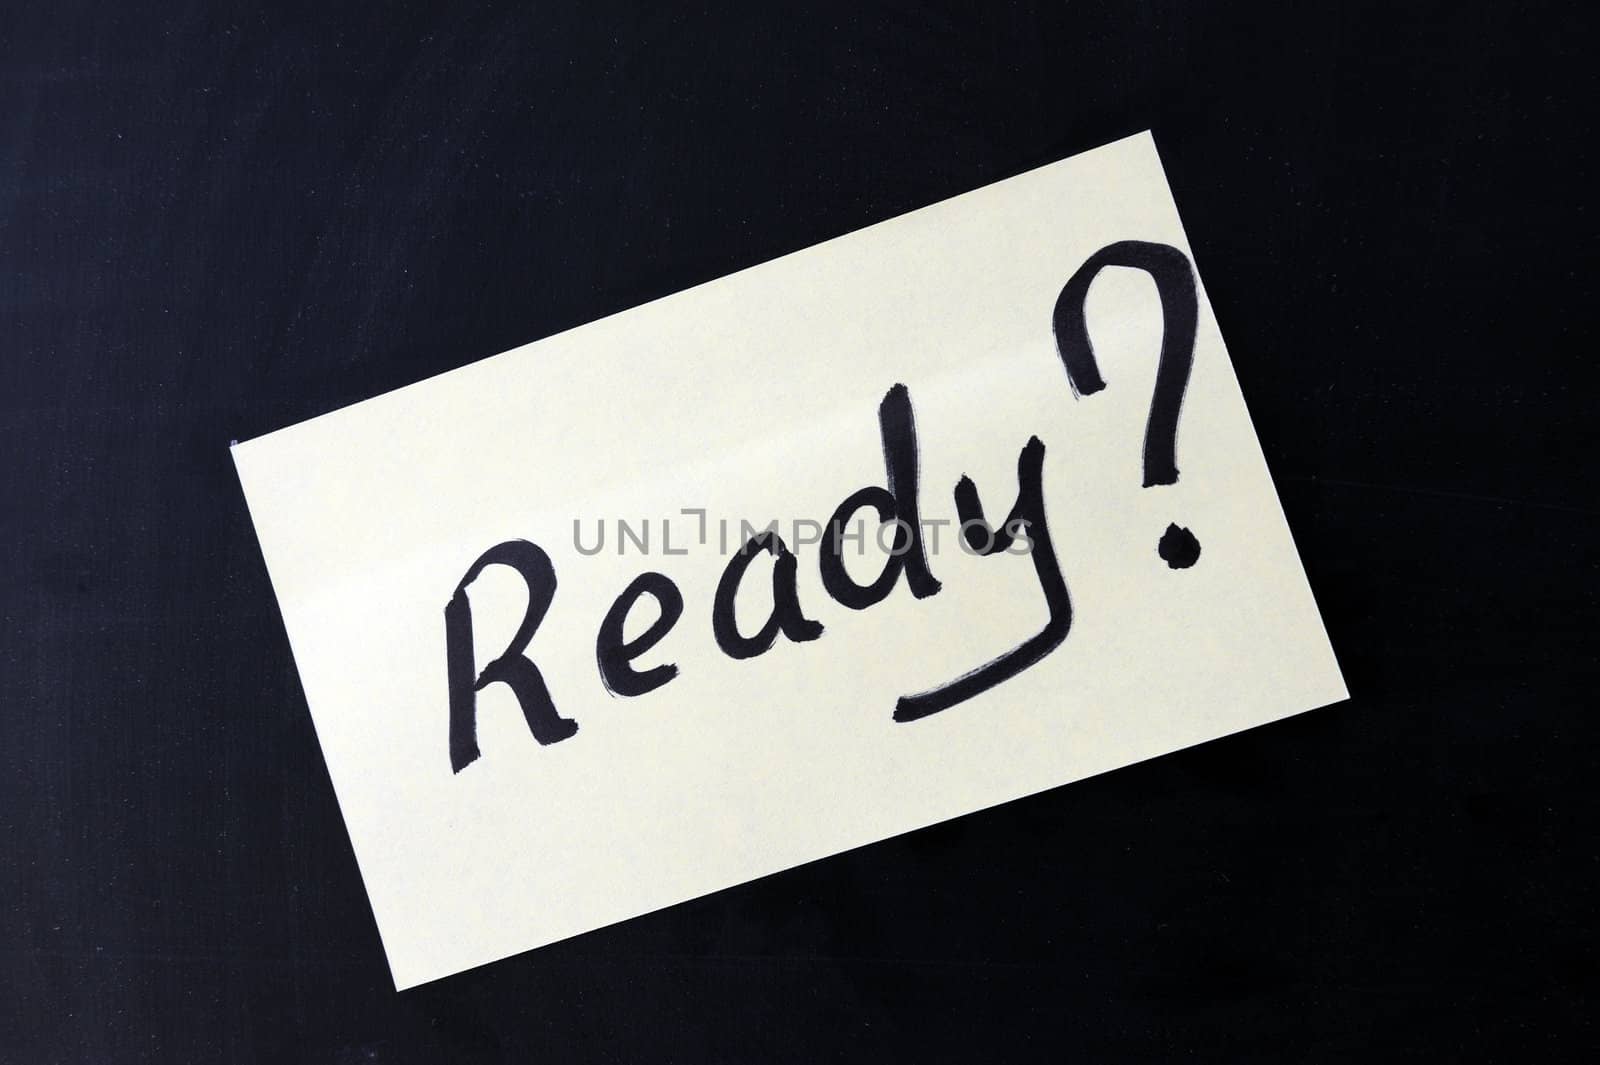 a notepaper which writes "Ready ?" on a chalkboard